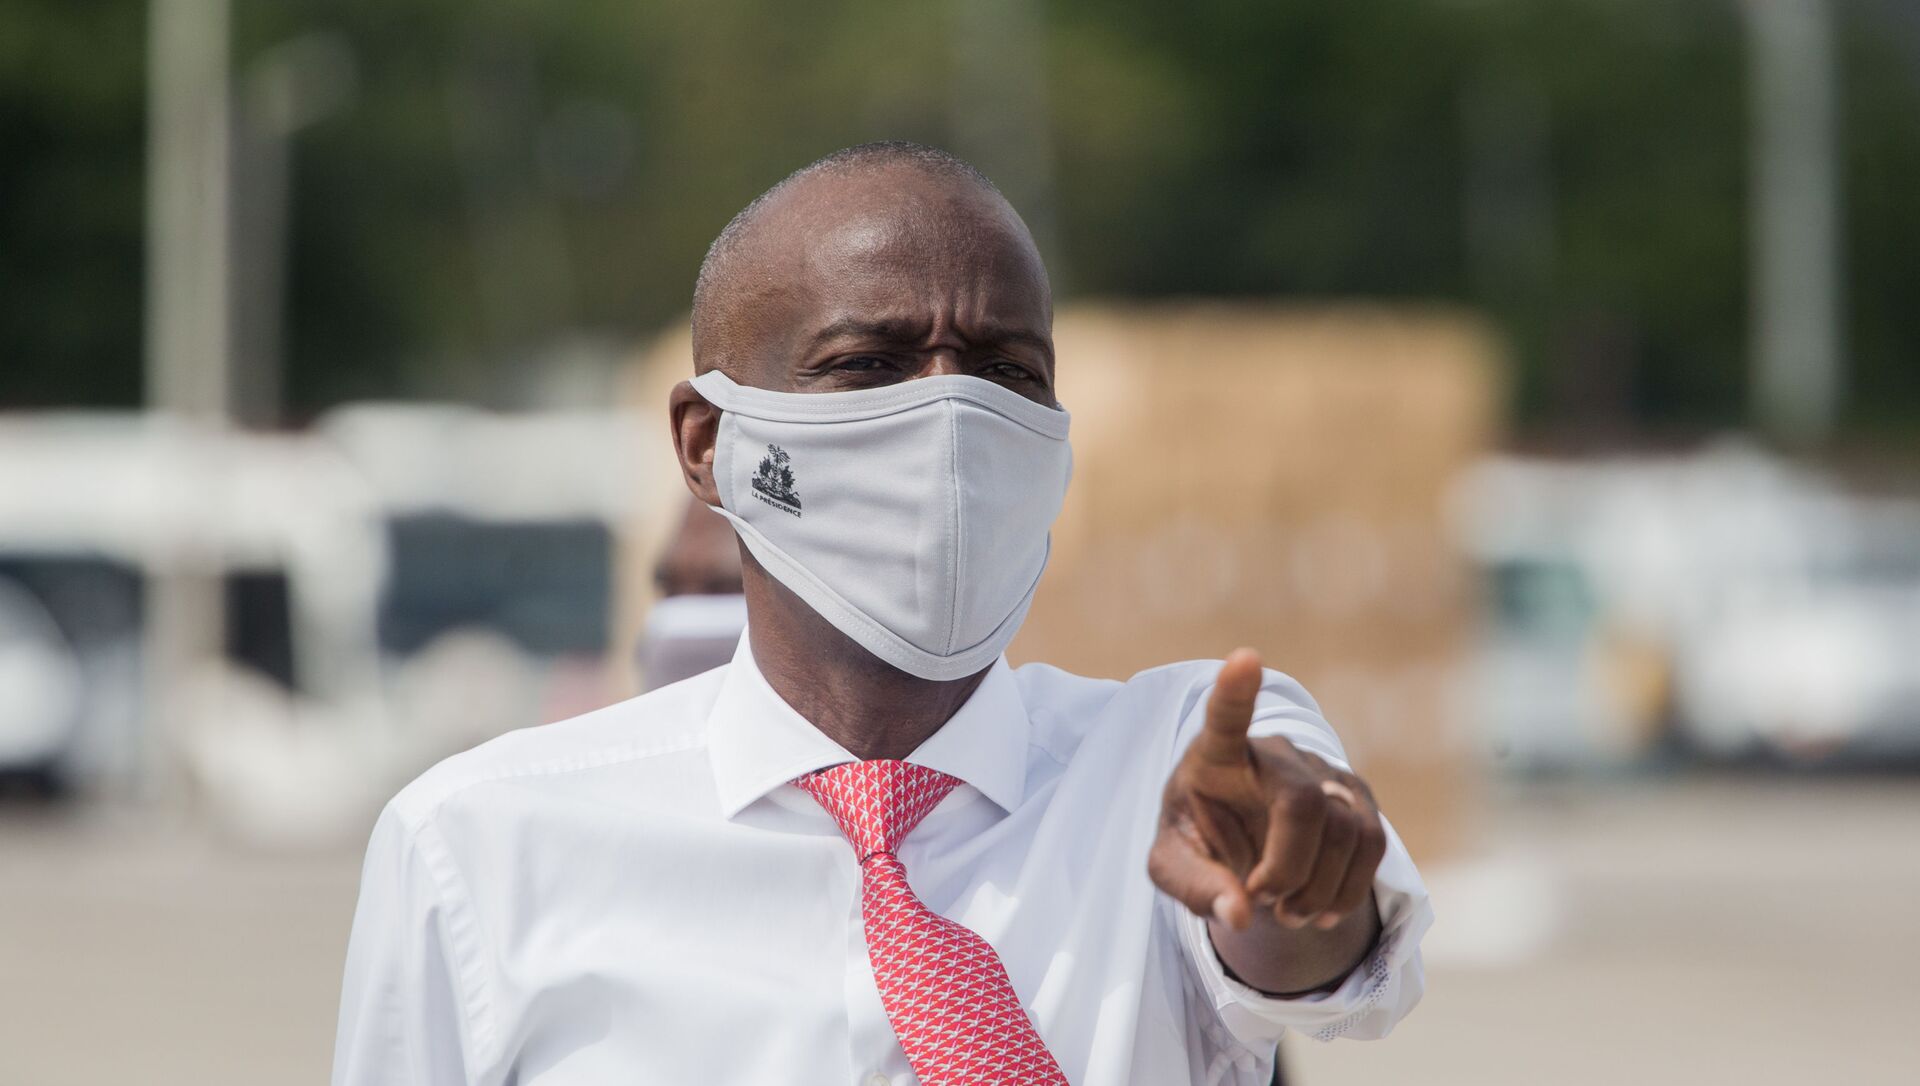  In this file photo taken on May 7, 2020 Haitian President Jovenel Moise instructs staff members on the tarmac of  Toussaint Louverture International Airport in Port-au-Prince, as coronavirus aid from China arrives in a cargo plane. - Sputnik International, 1920, 07.02.2021